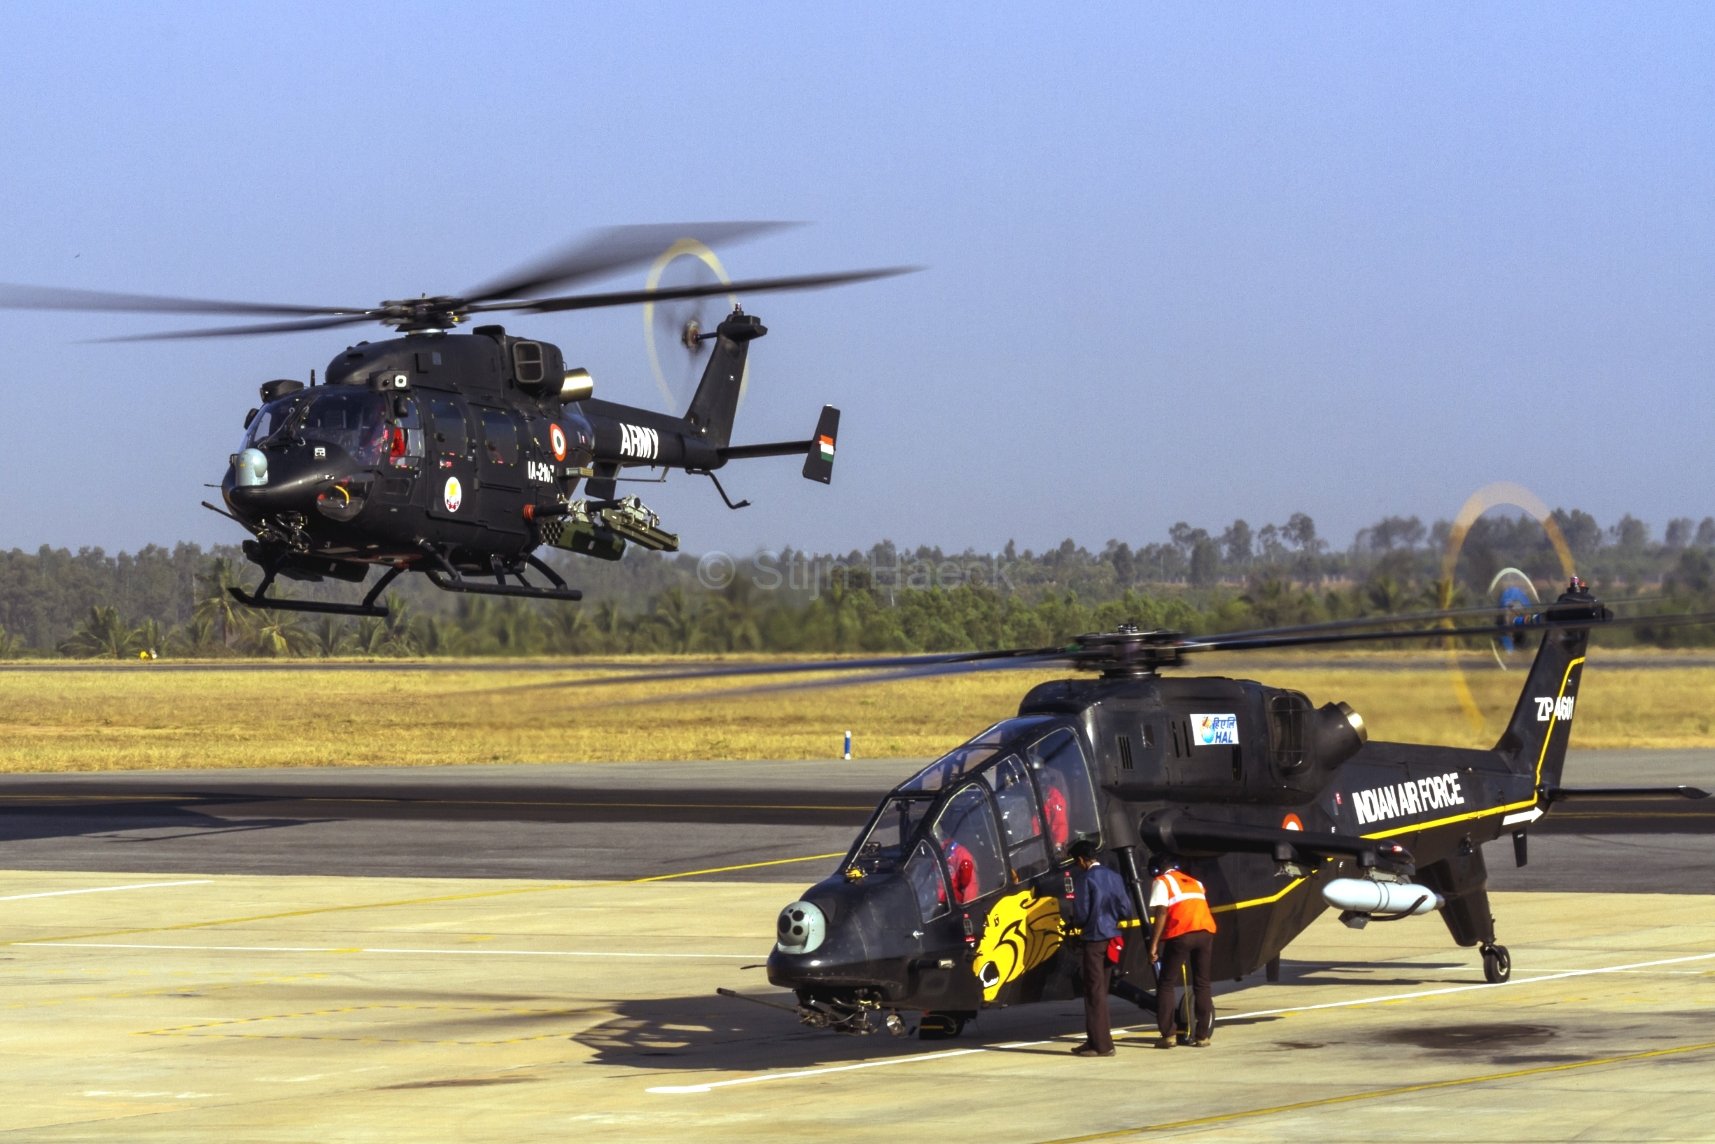 HAL Rudra, HAL Light Combat Helicopter (LCH), Helicopters Wallpaper